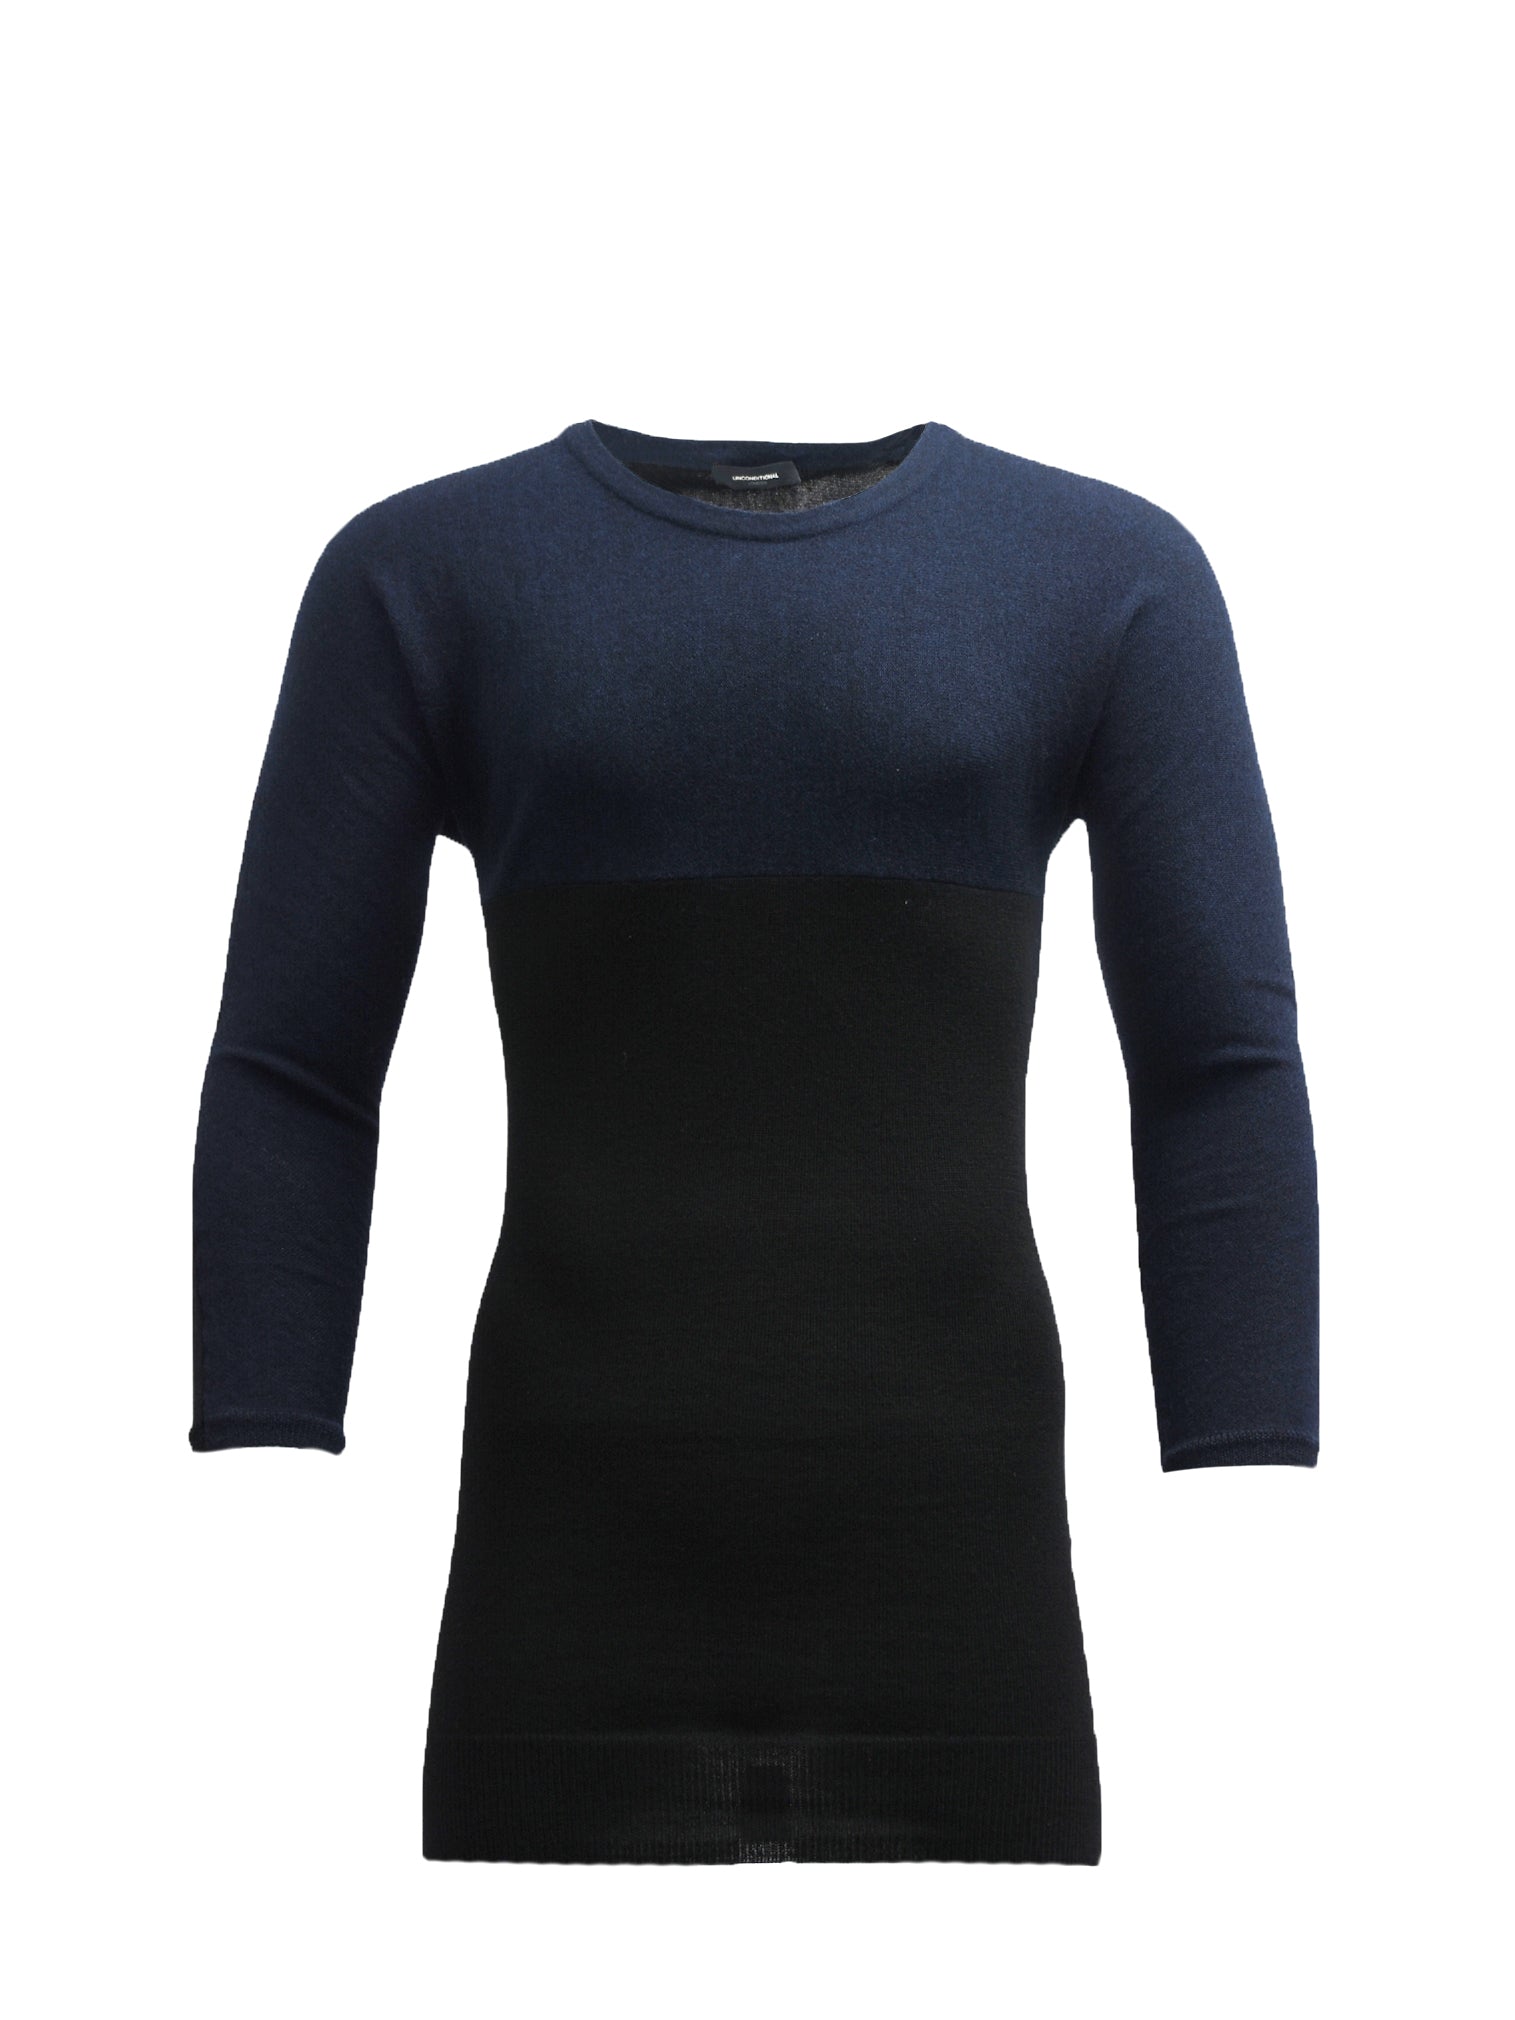 BLACK AND NAVY  LONGLINE KNITTED JUMPER